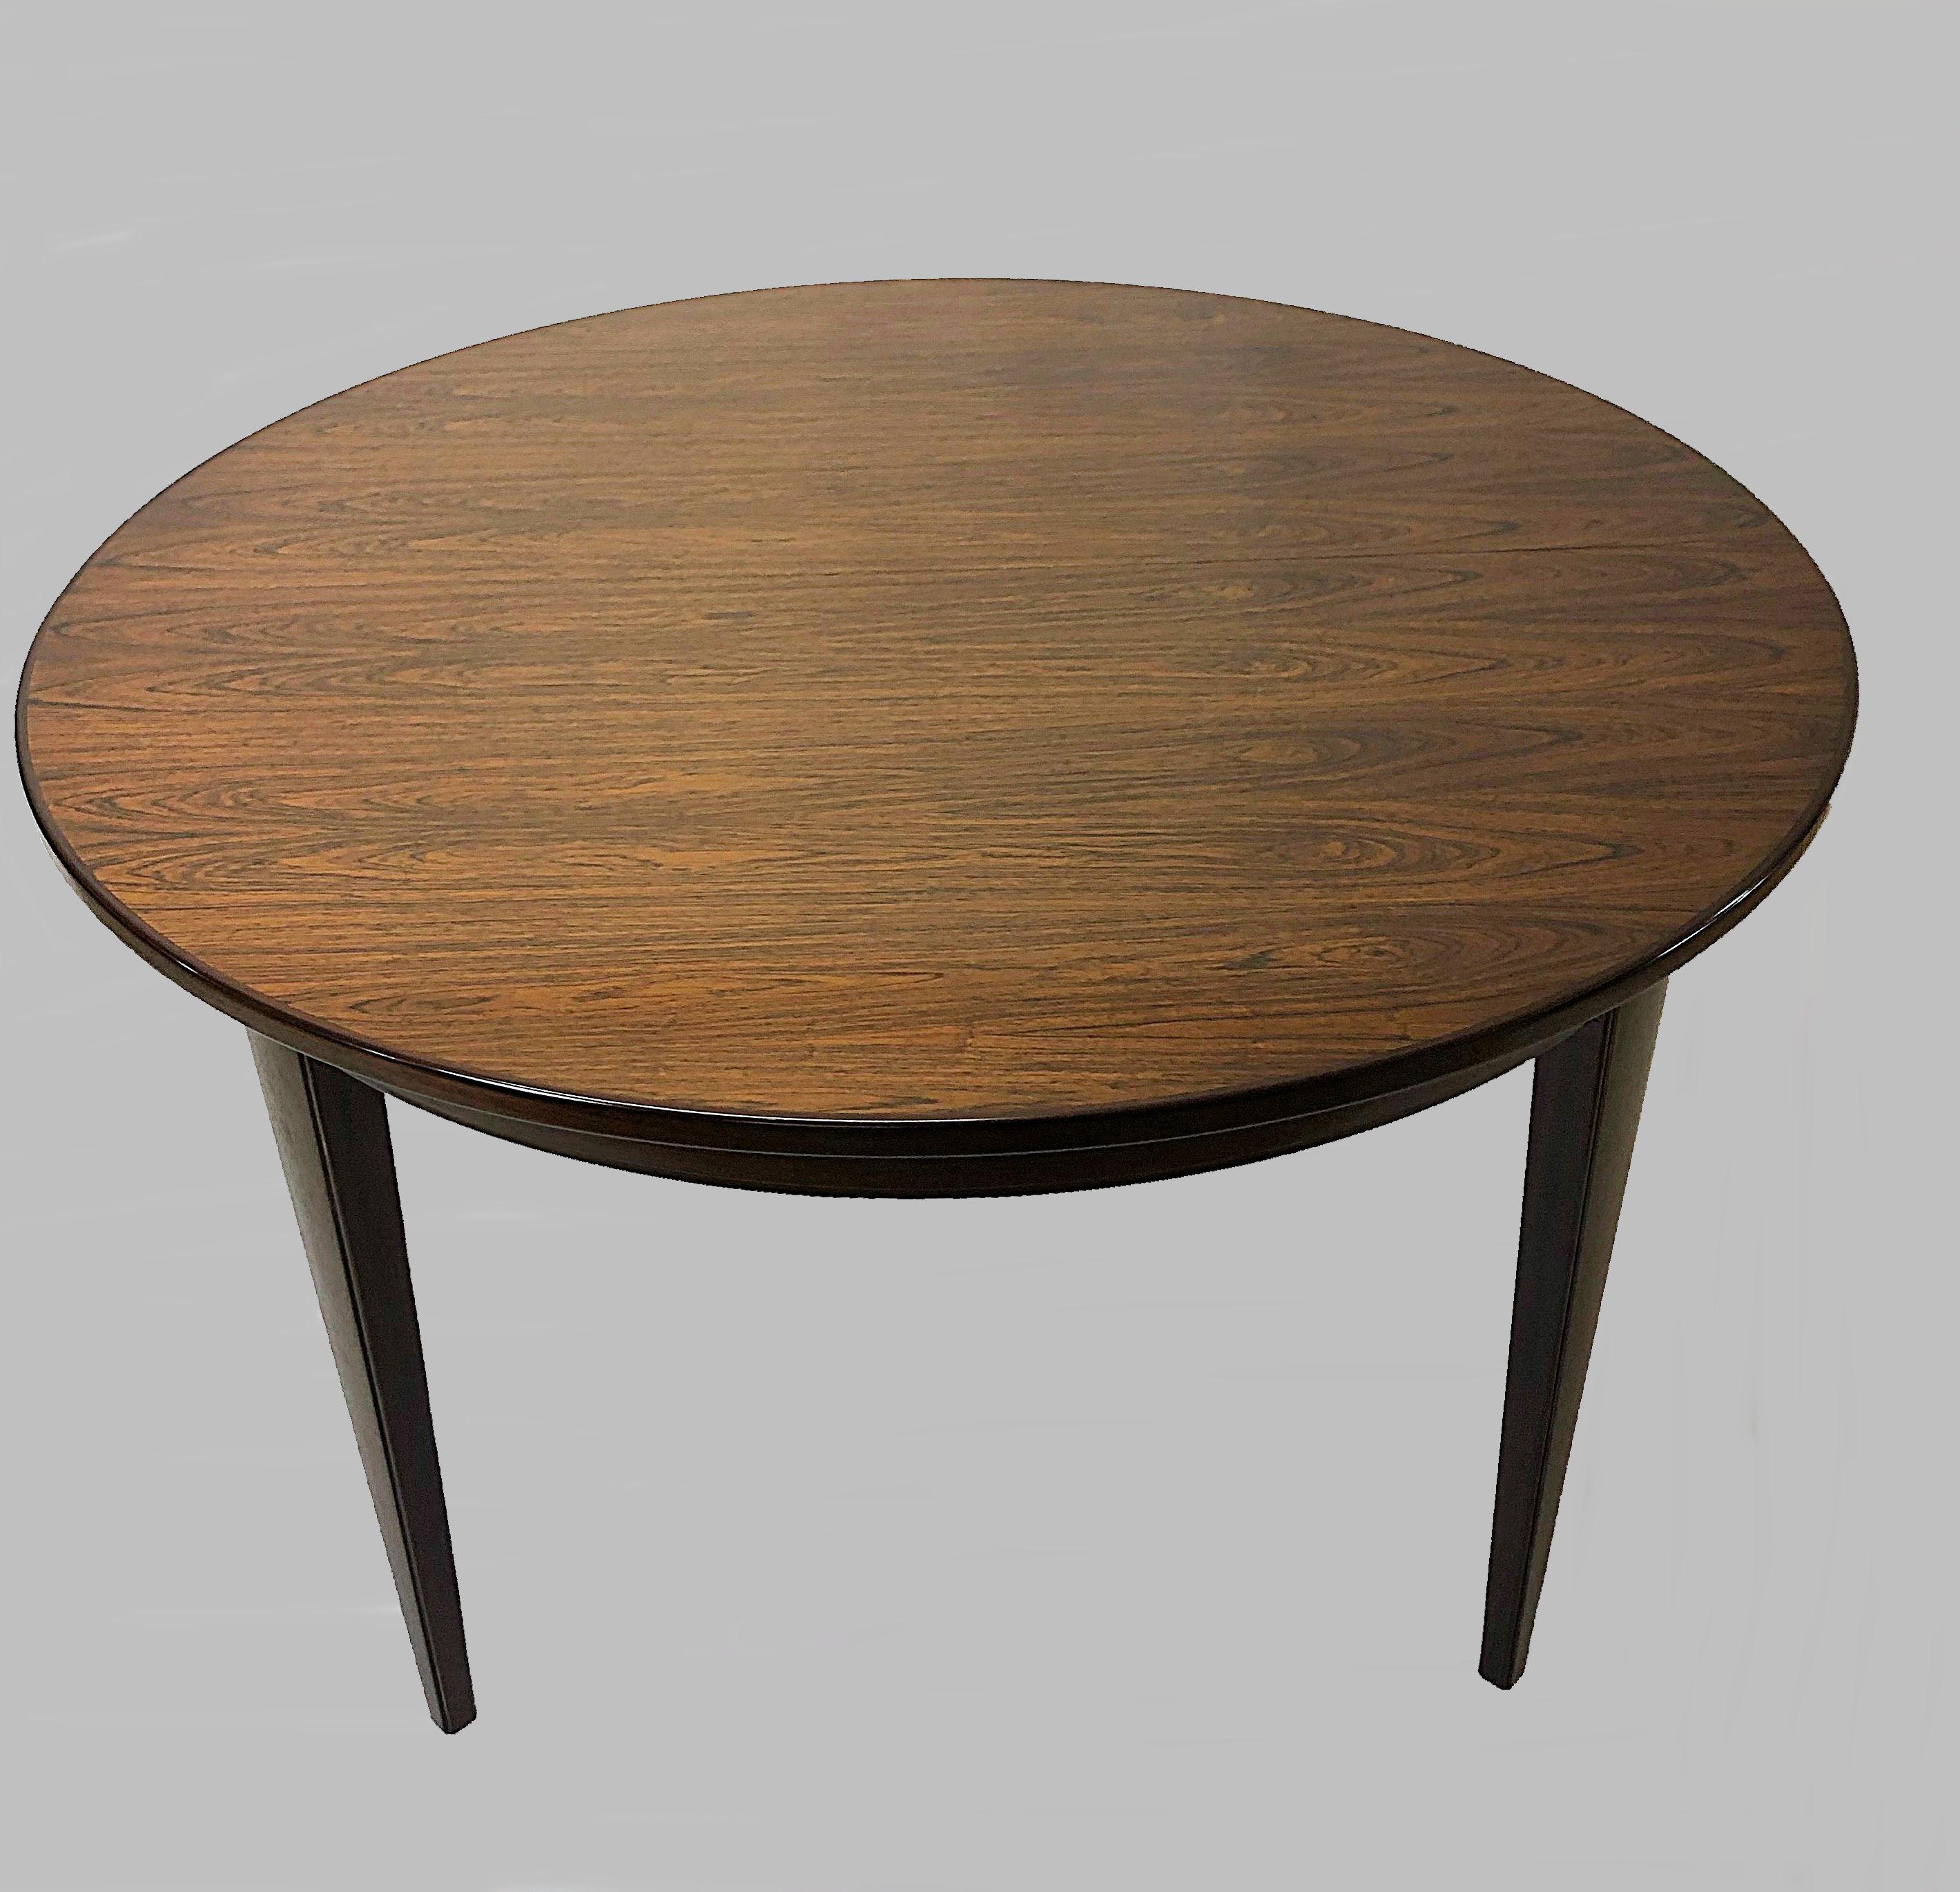 Danish Omann Junior Dining table in rosewood.

The well crafted dining table has a simple and elegant design that enhance the pattern of the rosewood. The dining table has one 55 cm. / 21.7 in. extension leaf in rosewood and two additional extension